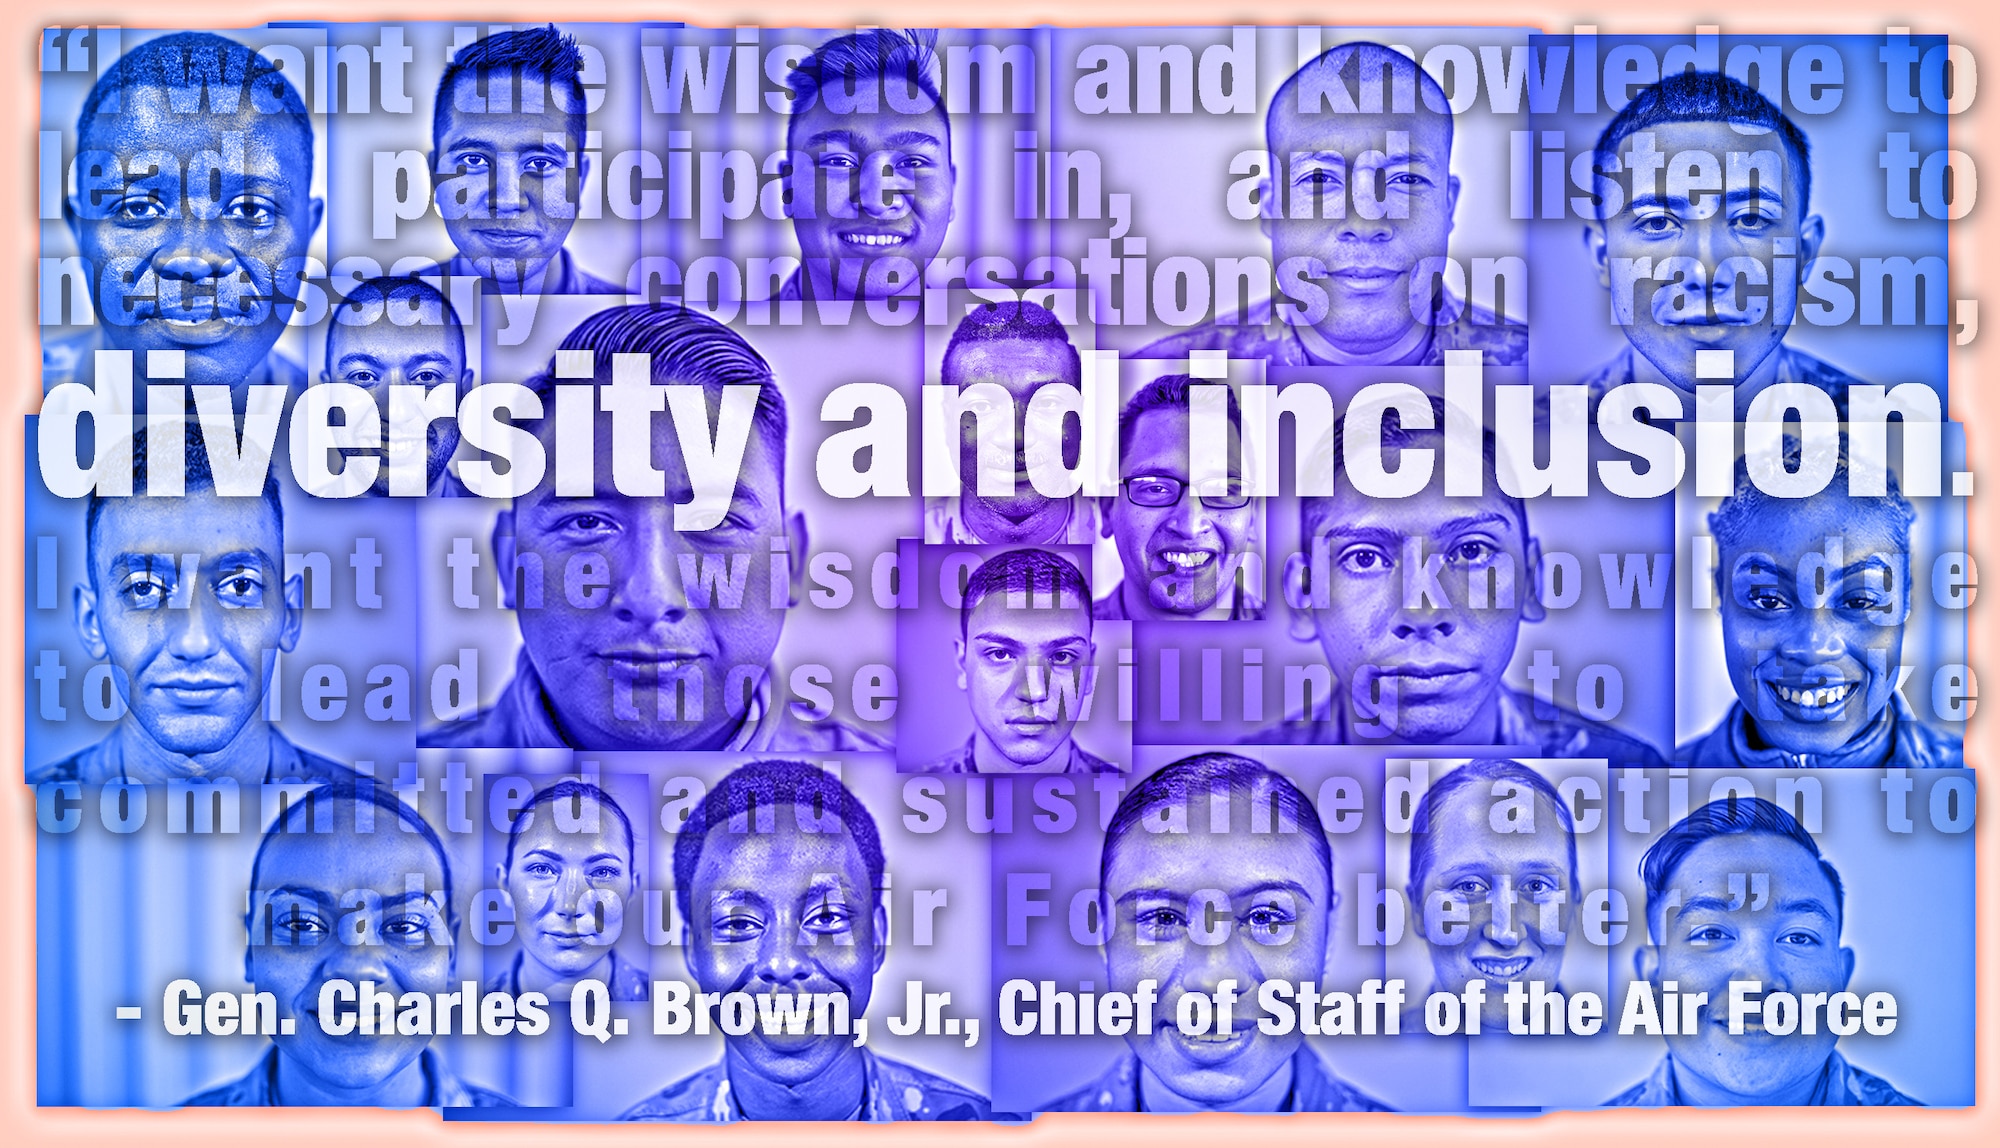 many portraits are arranged behind a quote from Gen. Charles Q. Brown, Jr.: "I want the wisdom and knowledge to lead, participate in and listen to necessary conversations on racism, diversity and inclusion. I want the wisdom and knowledge to lead those willing to take committed and sustained action to make our Air Force better."